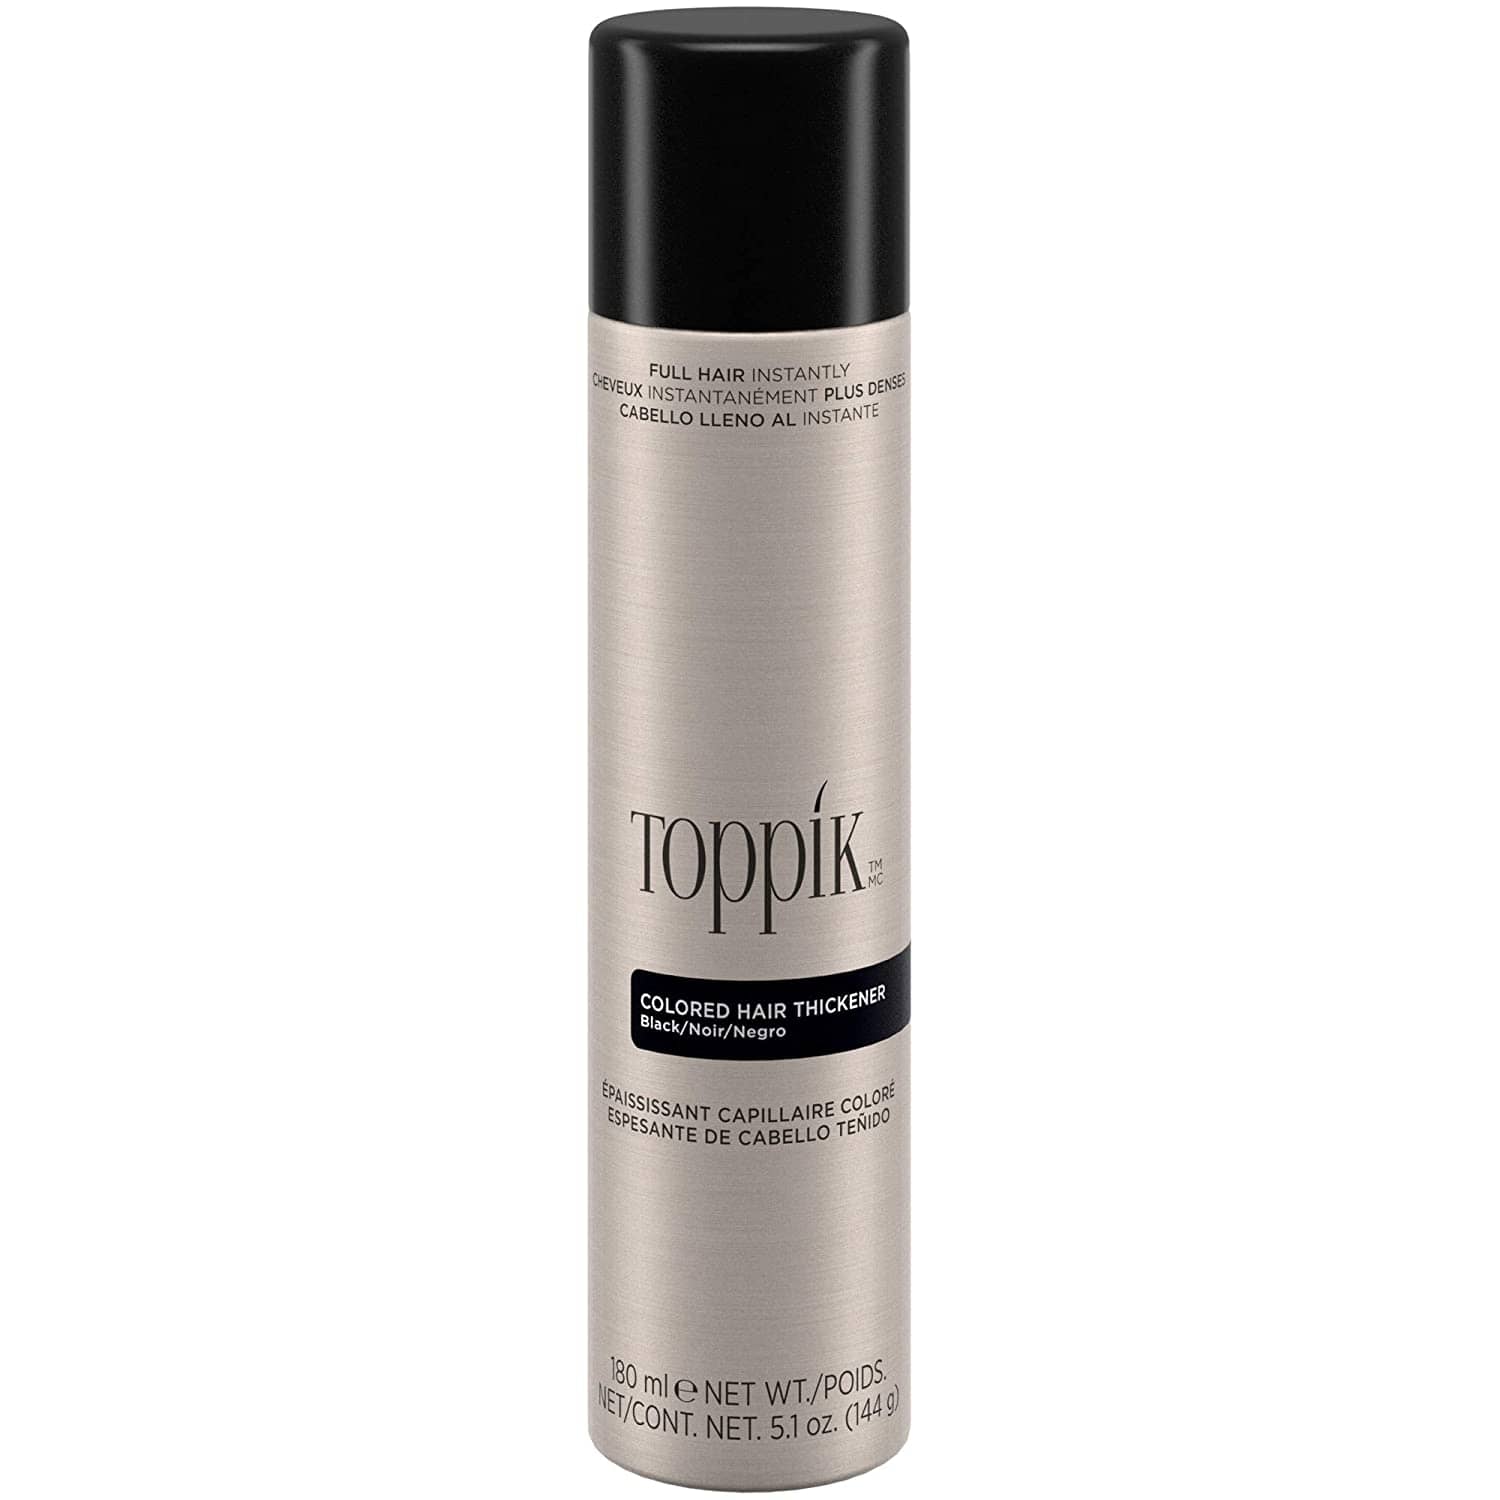 Toppik Colored Hair Thickener - BLACK Toppik 5.1 oz/144g bottle Shop at Exclusive Beauty Club